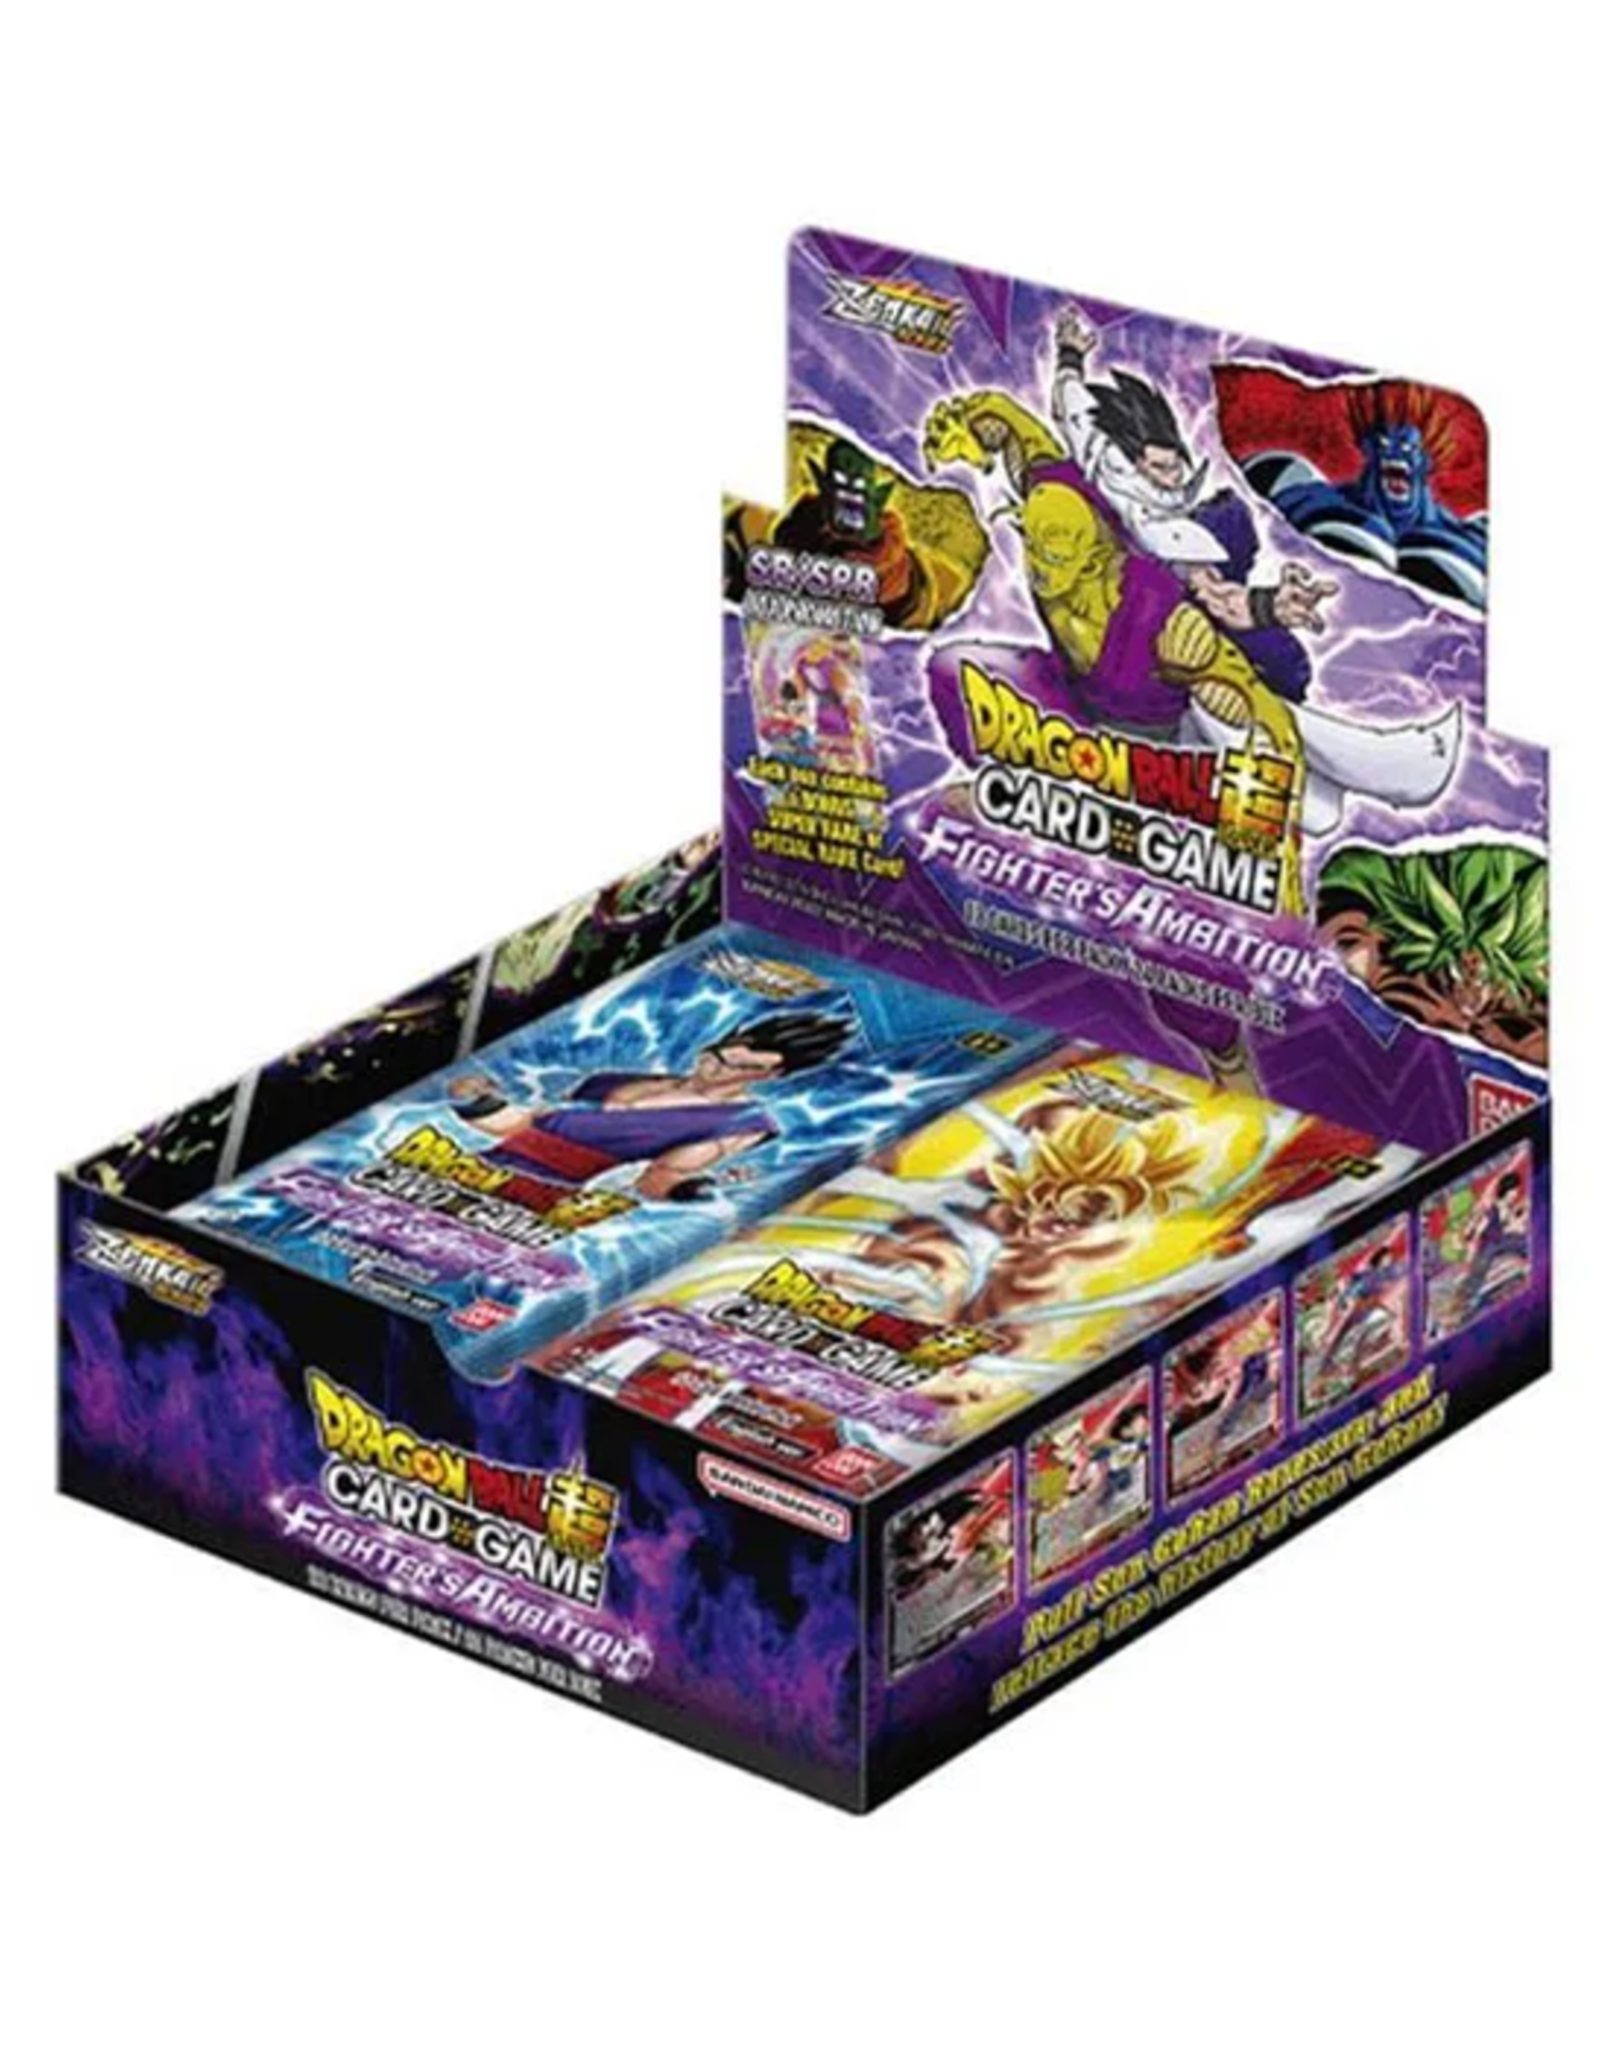 Bandai Dragon Ball Super: The Card Game - Fighter's Ambition - Booster Box